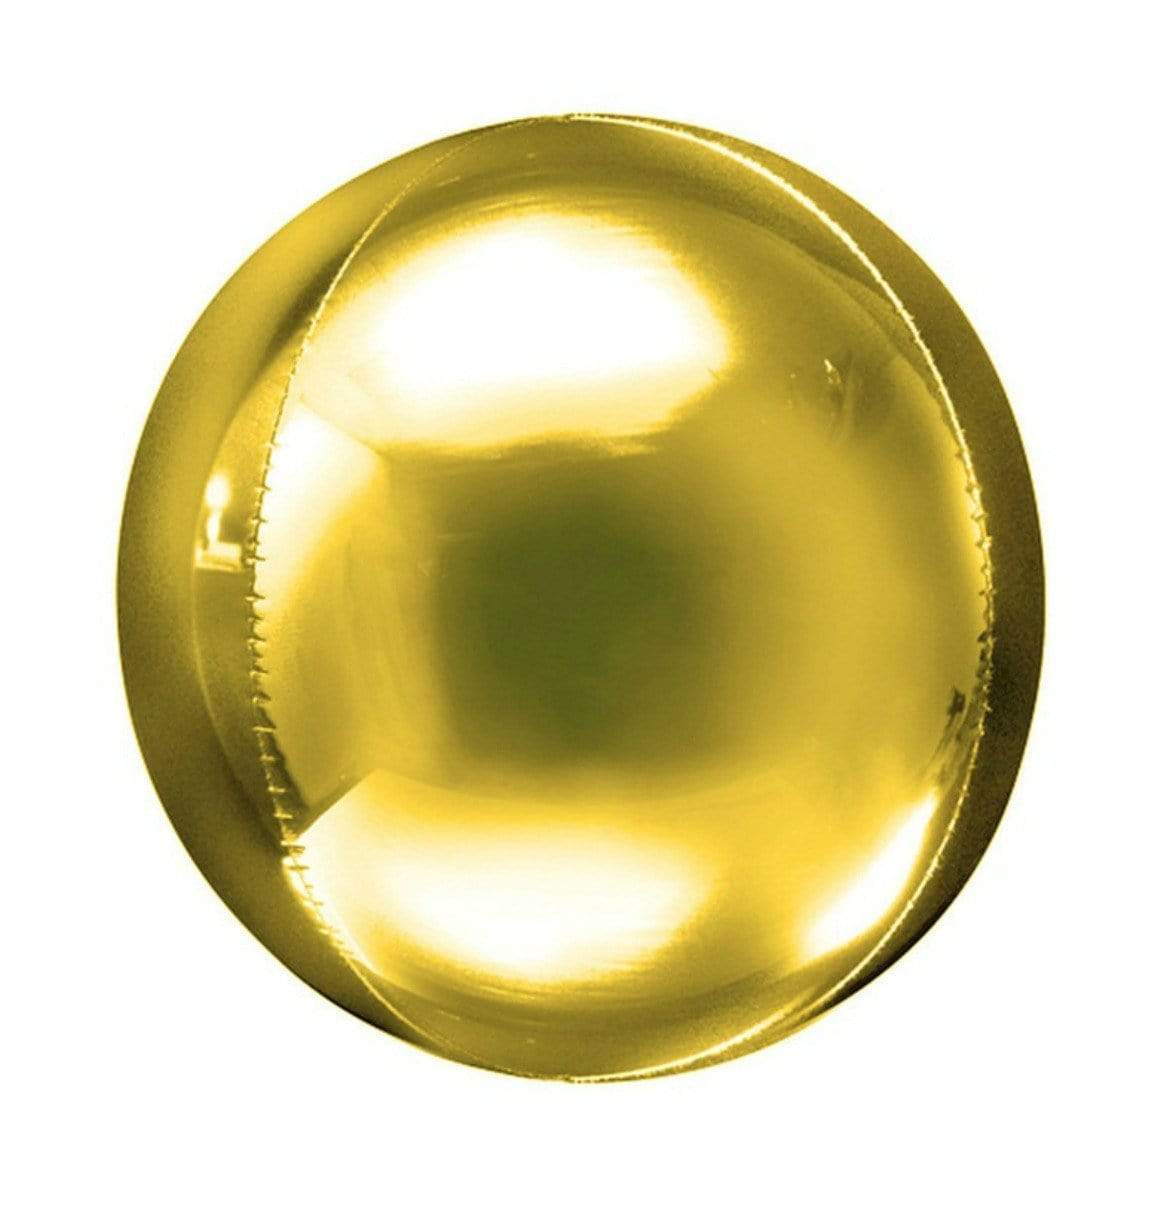 Orb Balloons 16" | Gold Orbz Balloons | Helium Balloons for Events Anagram